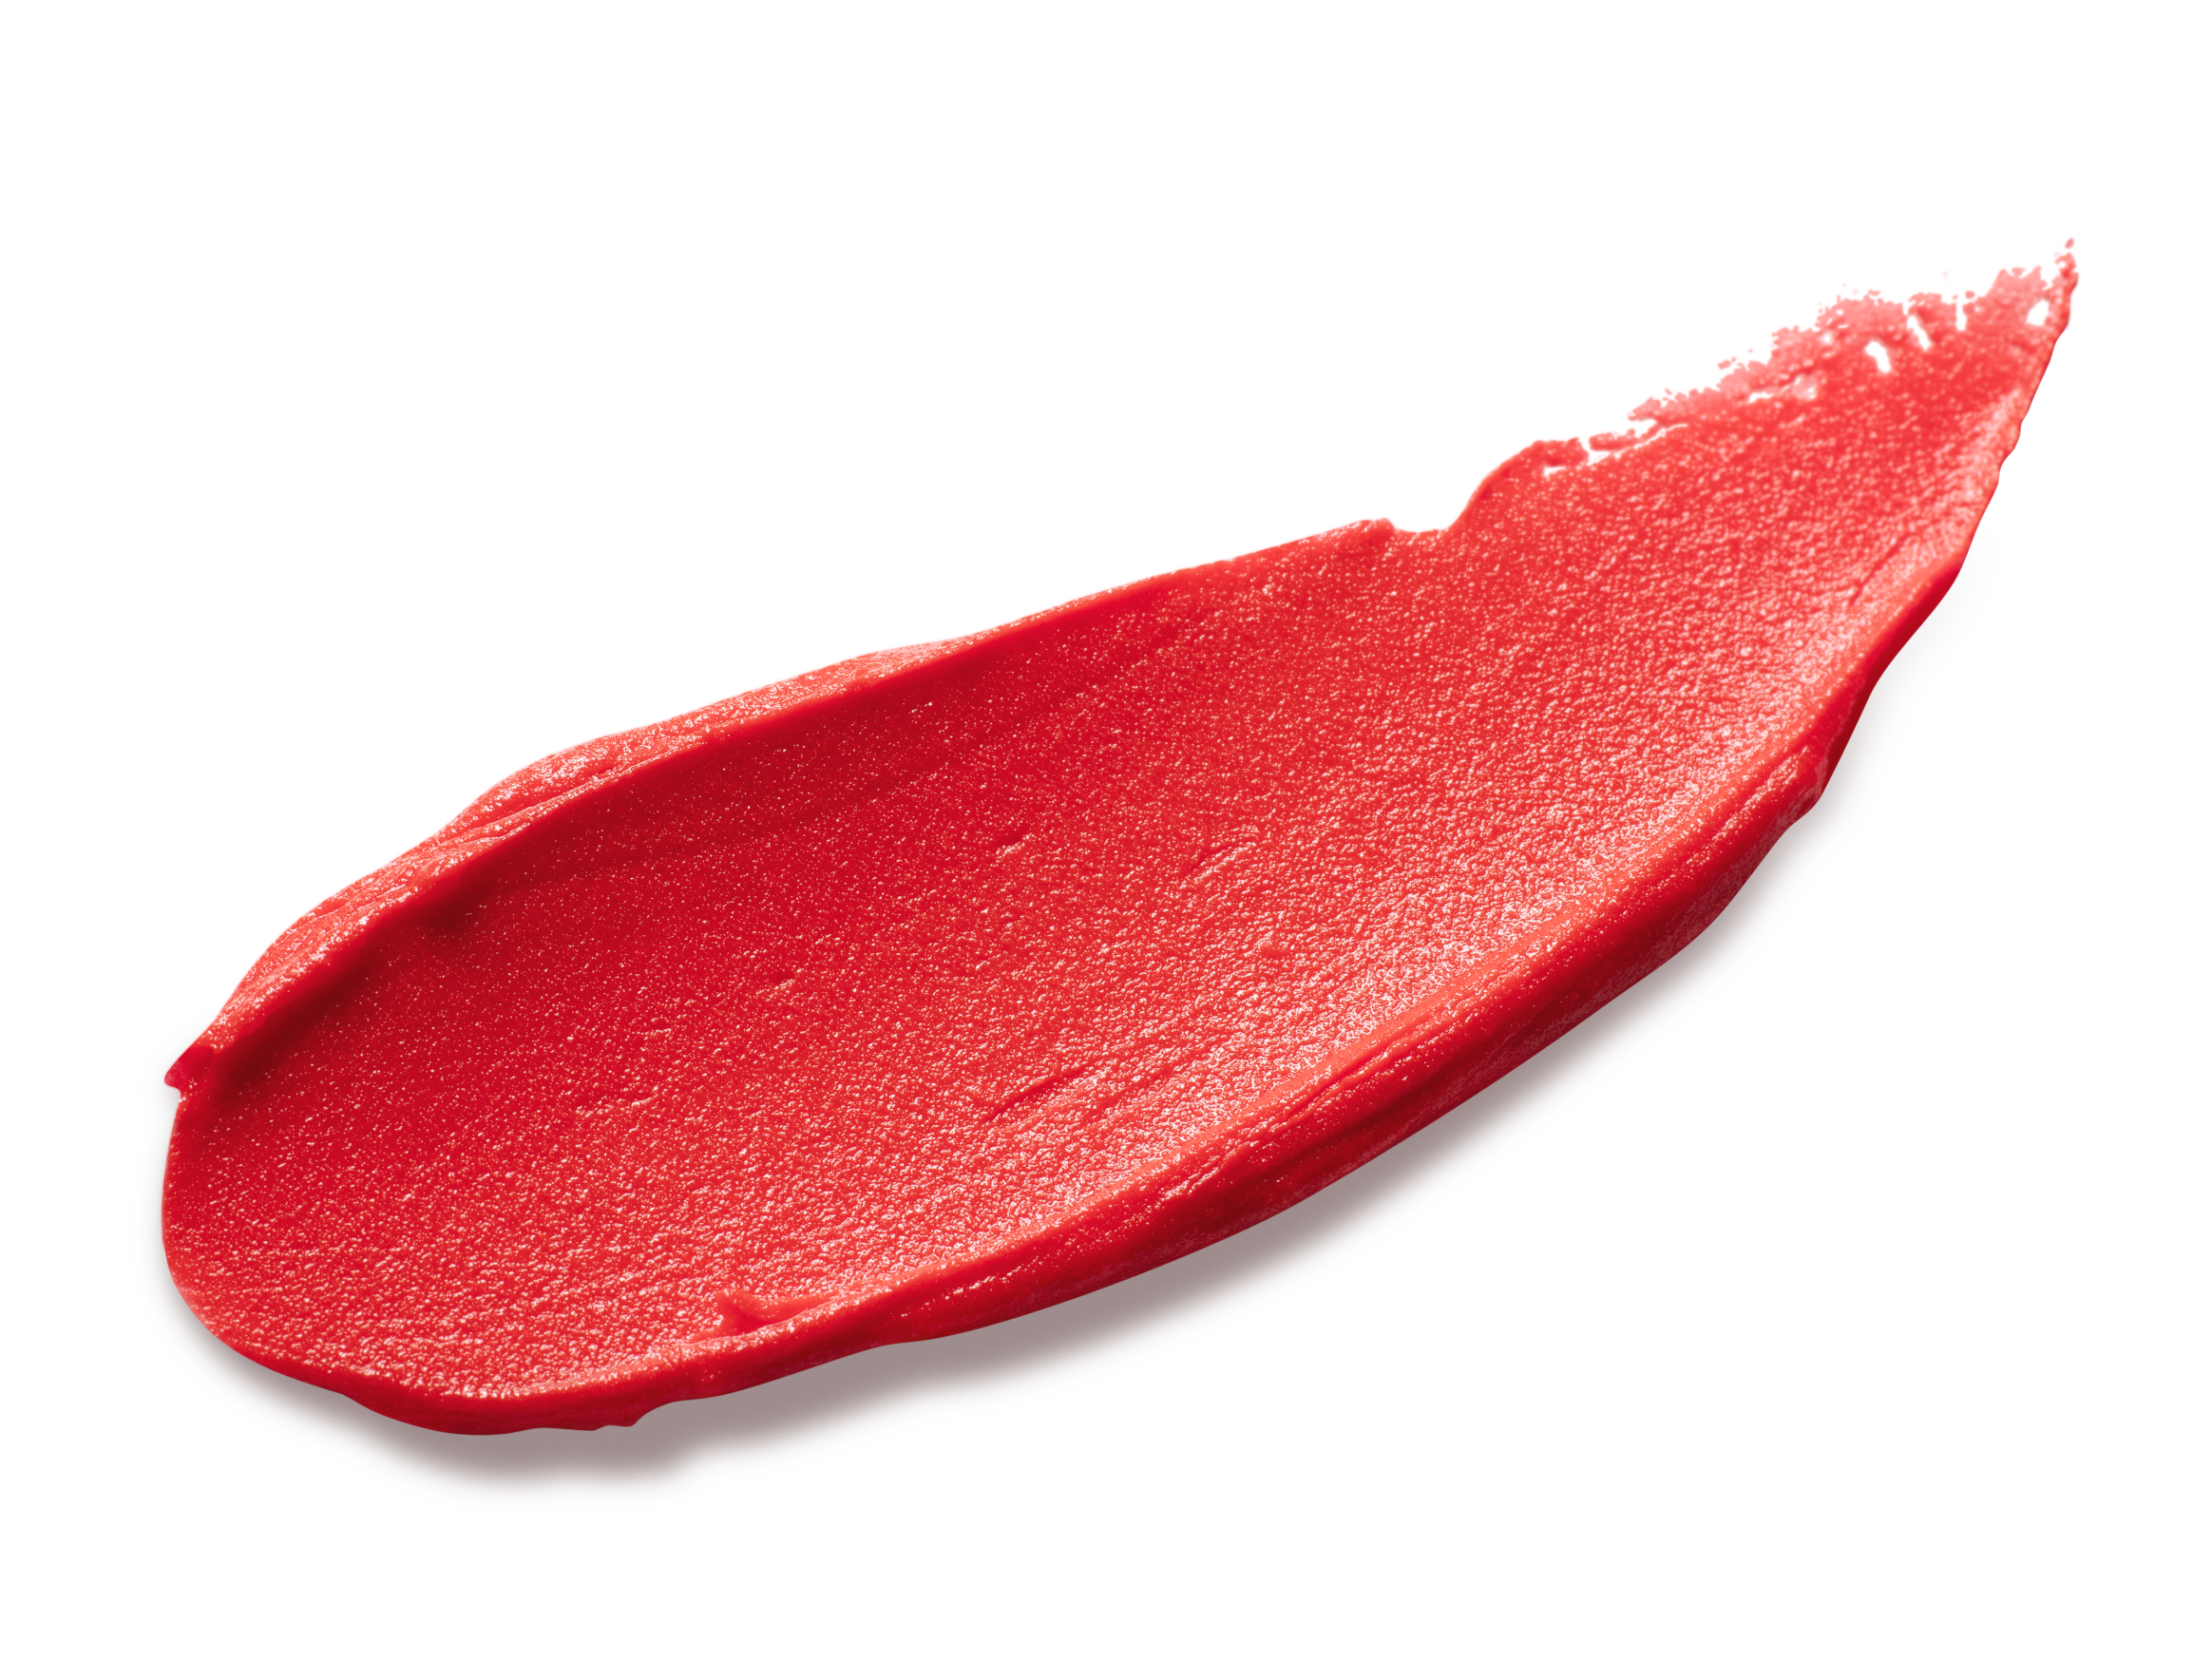 Nutricia Rouge Cherry